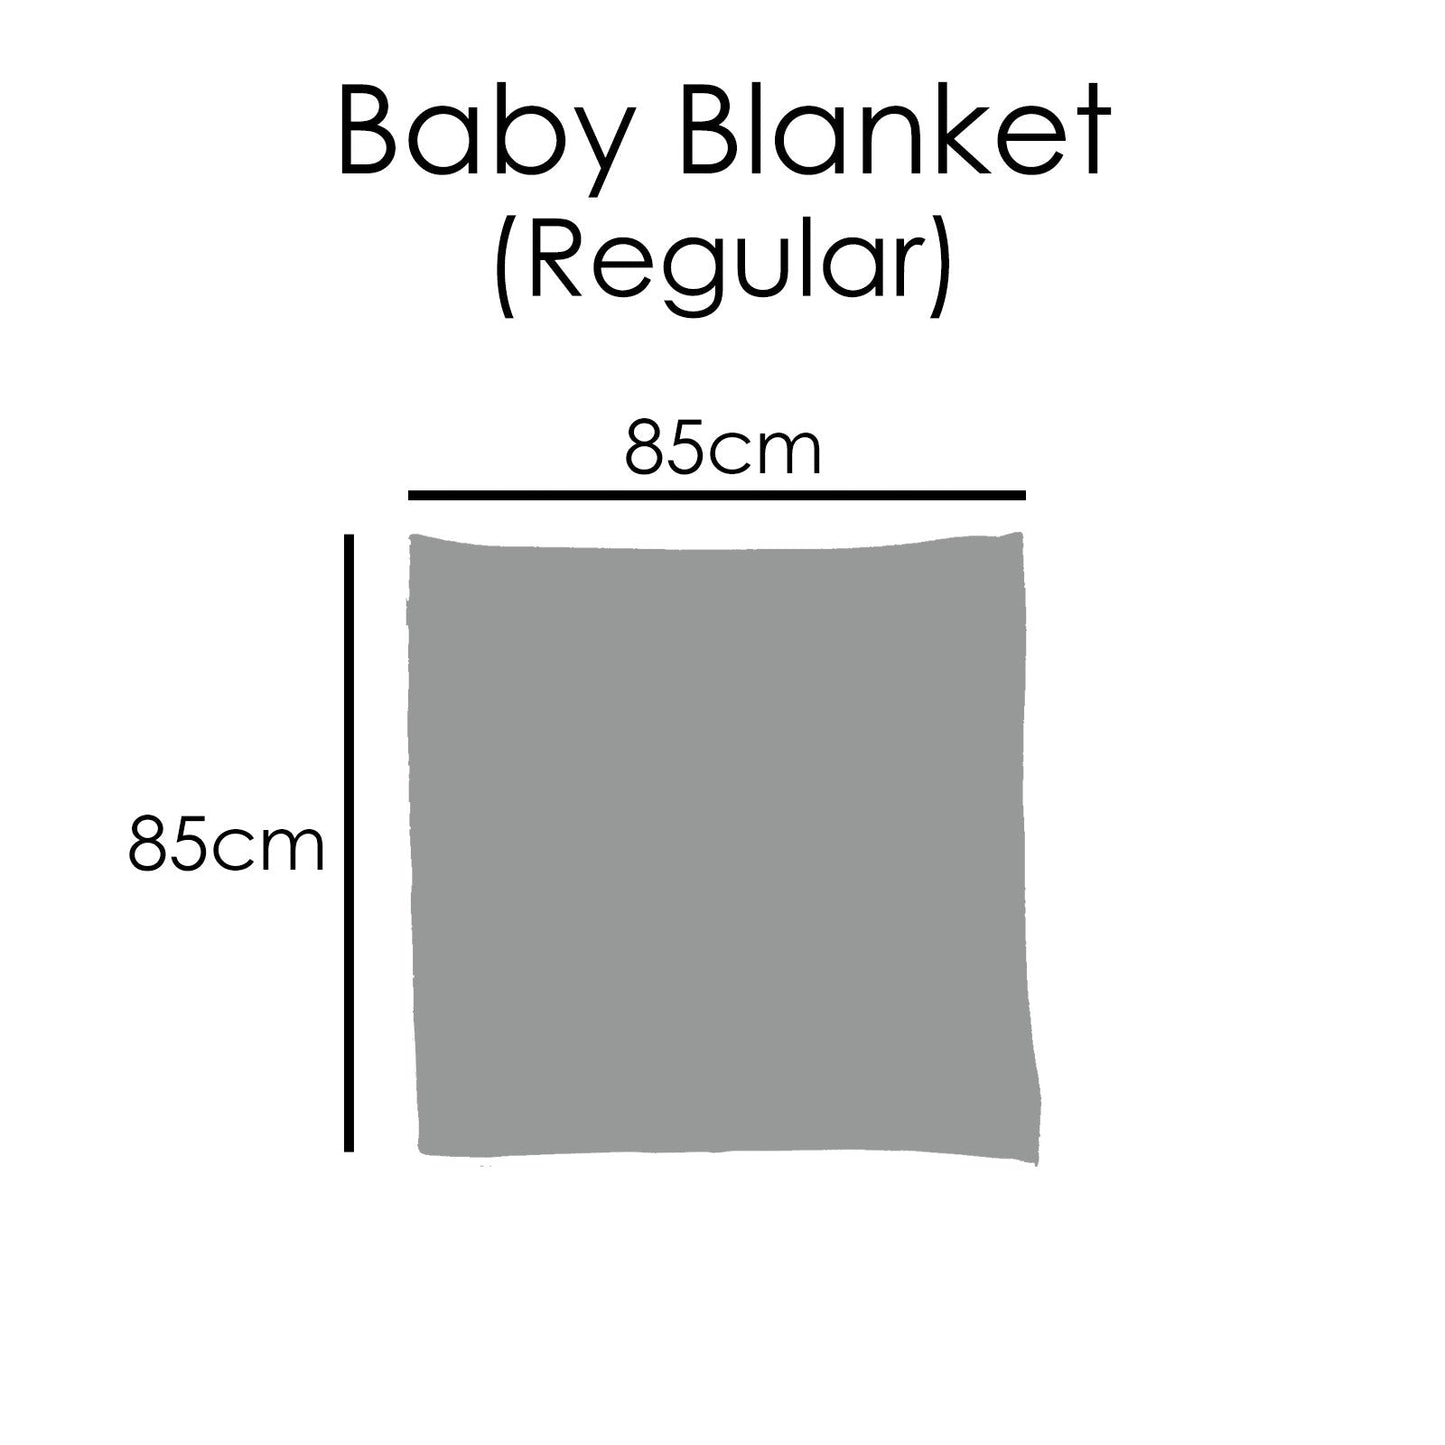 Personalised Baby Blanket with Stylish Text and Arrow Love Hearts Print